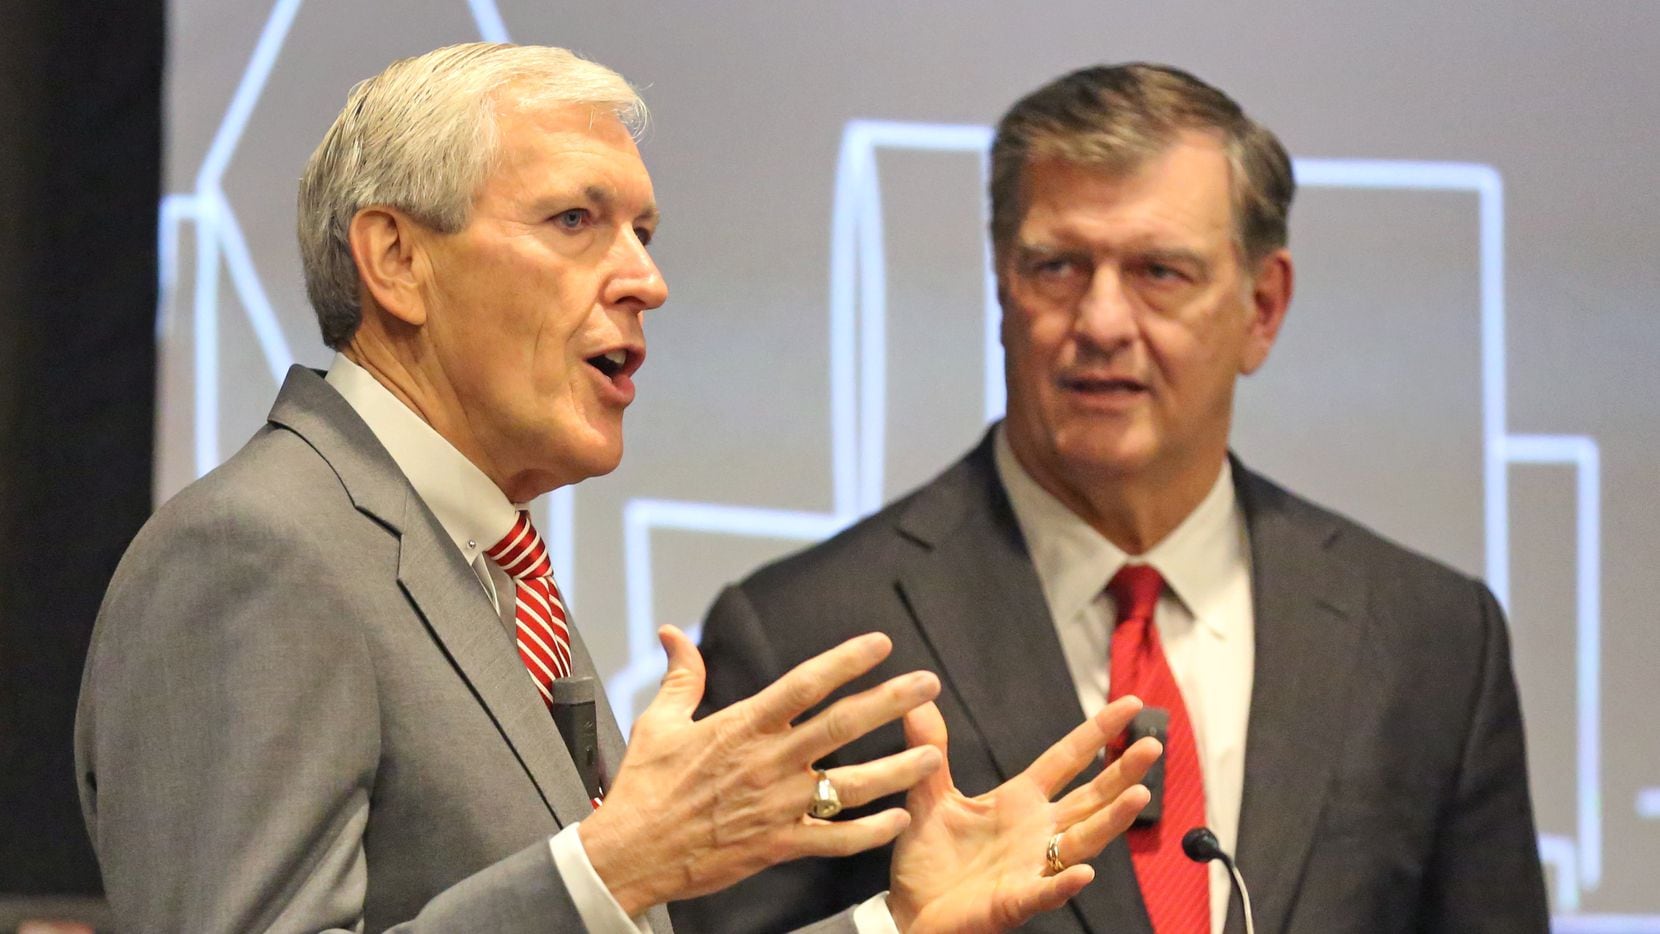 Former mayors Tom Leppert and Mike Rawlings, right, during an event at the Federal Reserve...